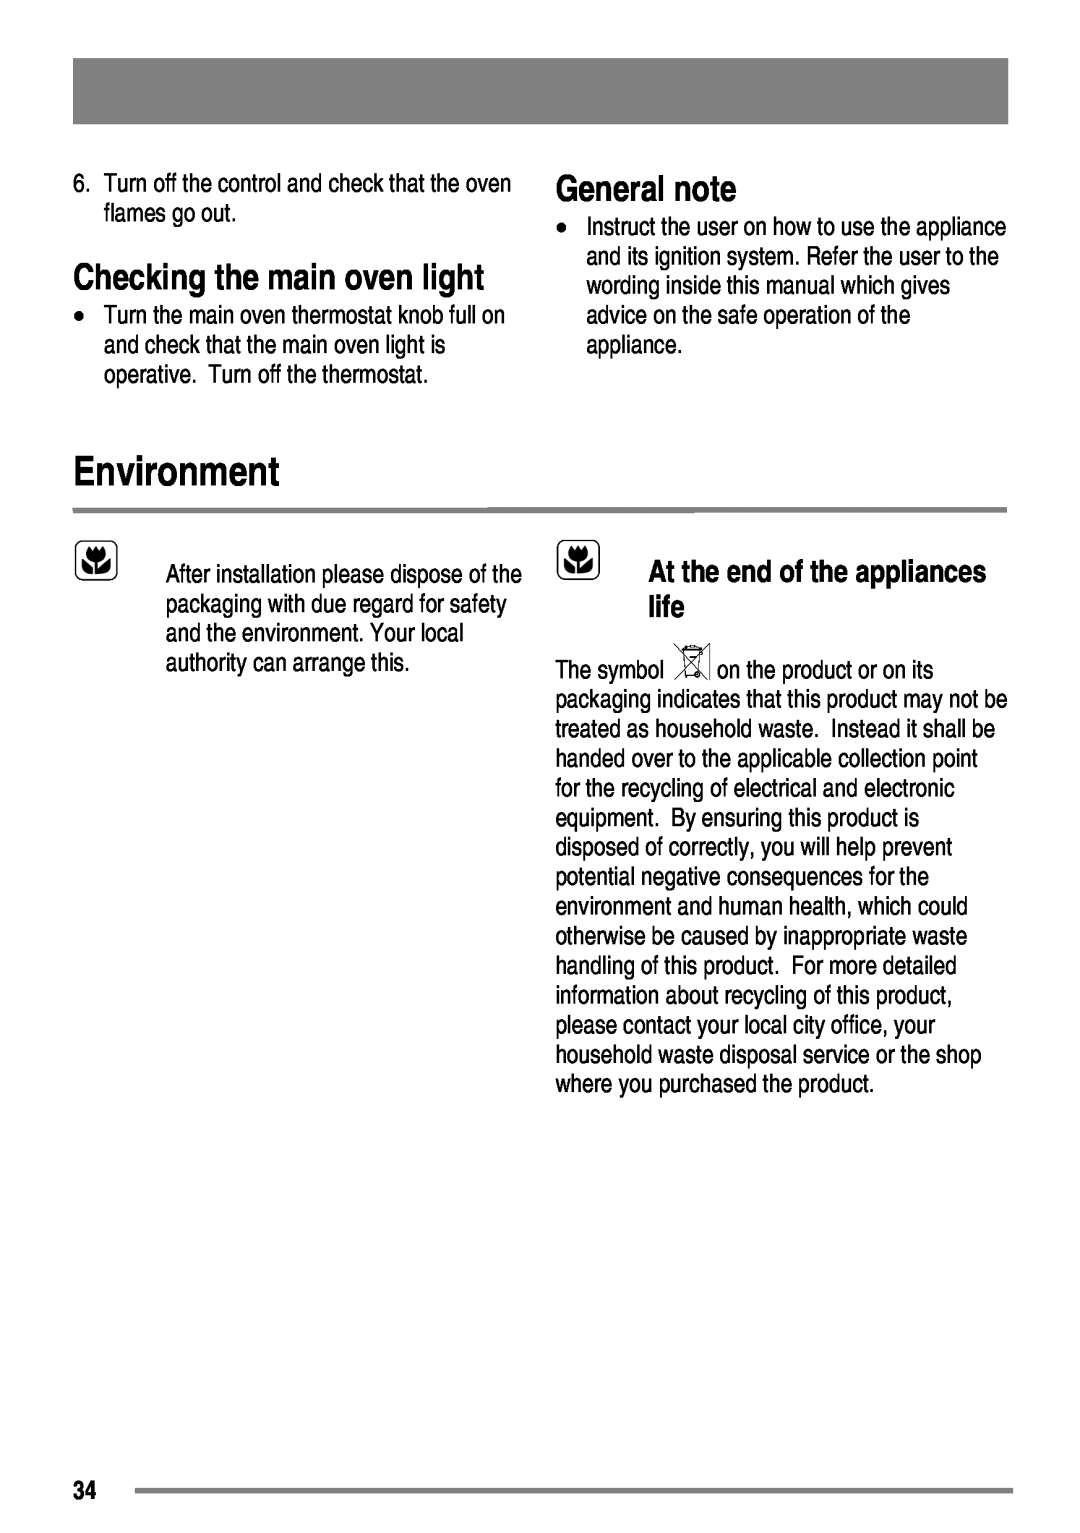 Zanussi ZKG6010 user manual Environment, General note, Checking the main oven light, At the end of the appliances life 